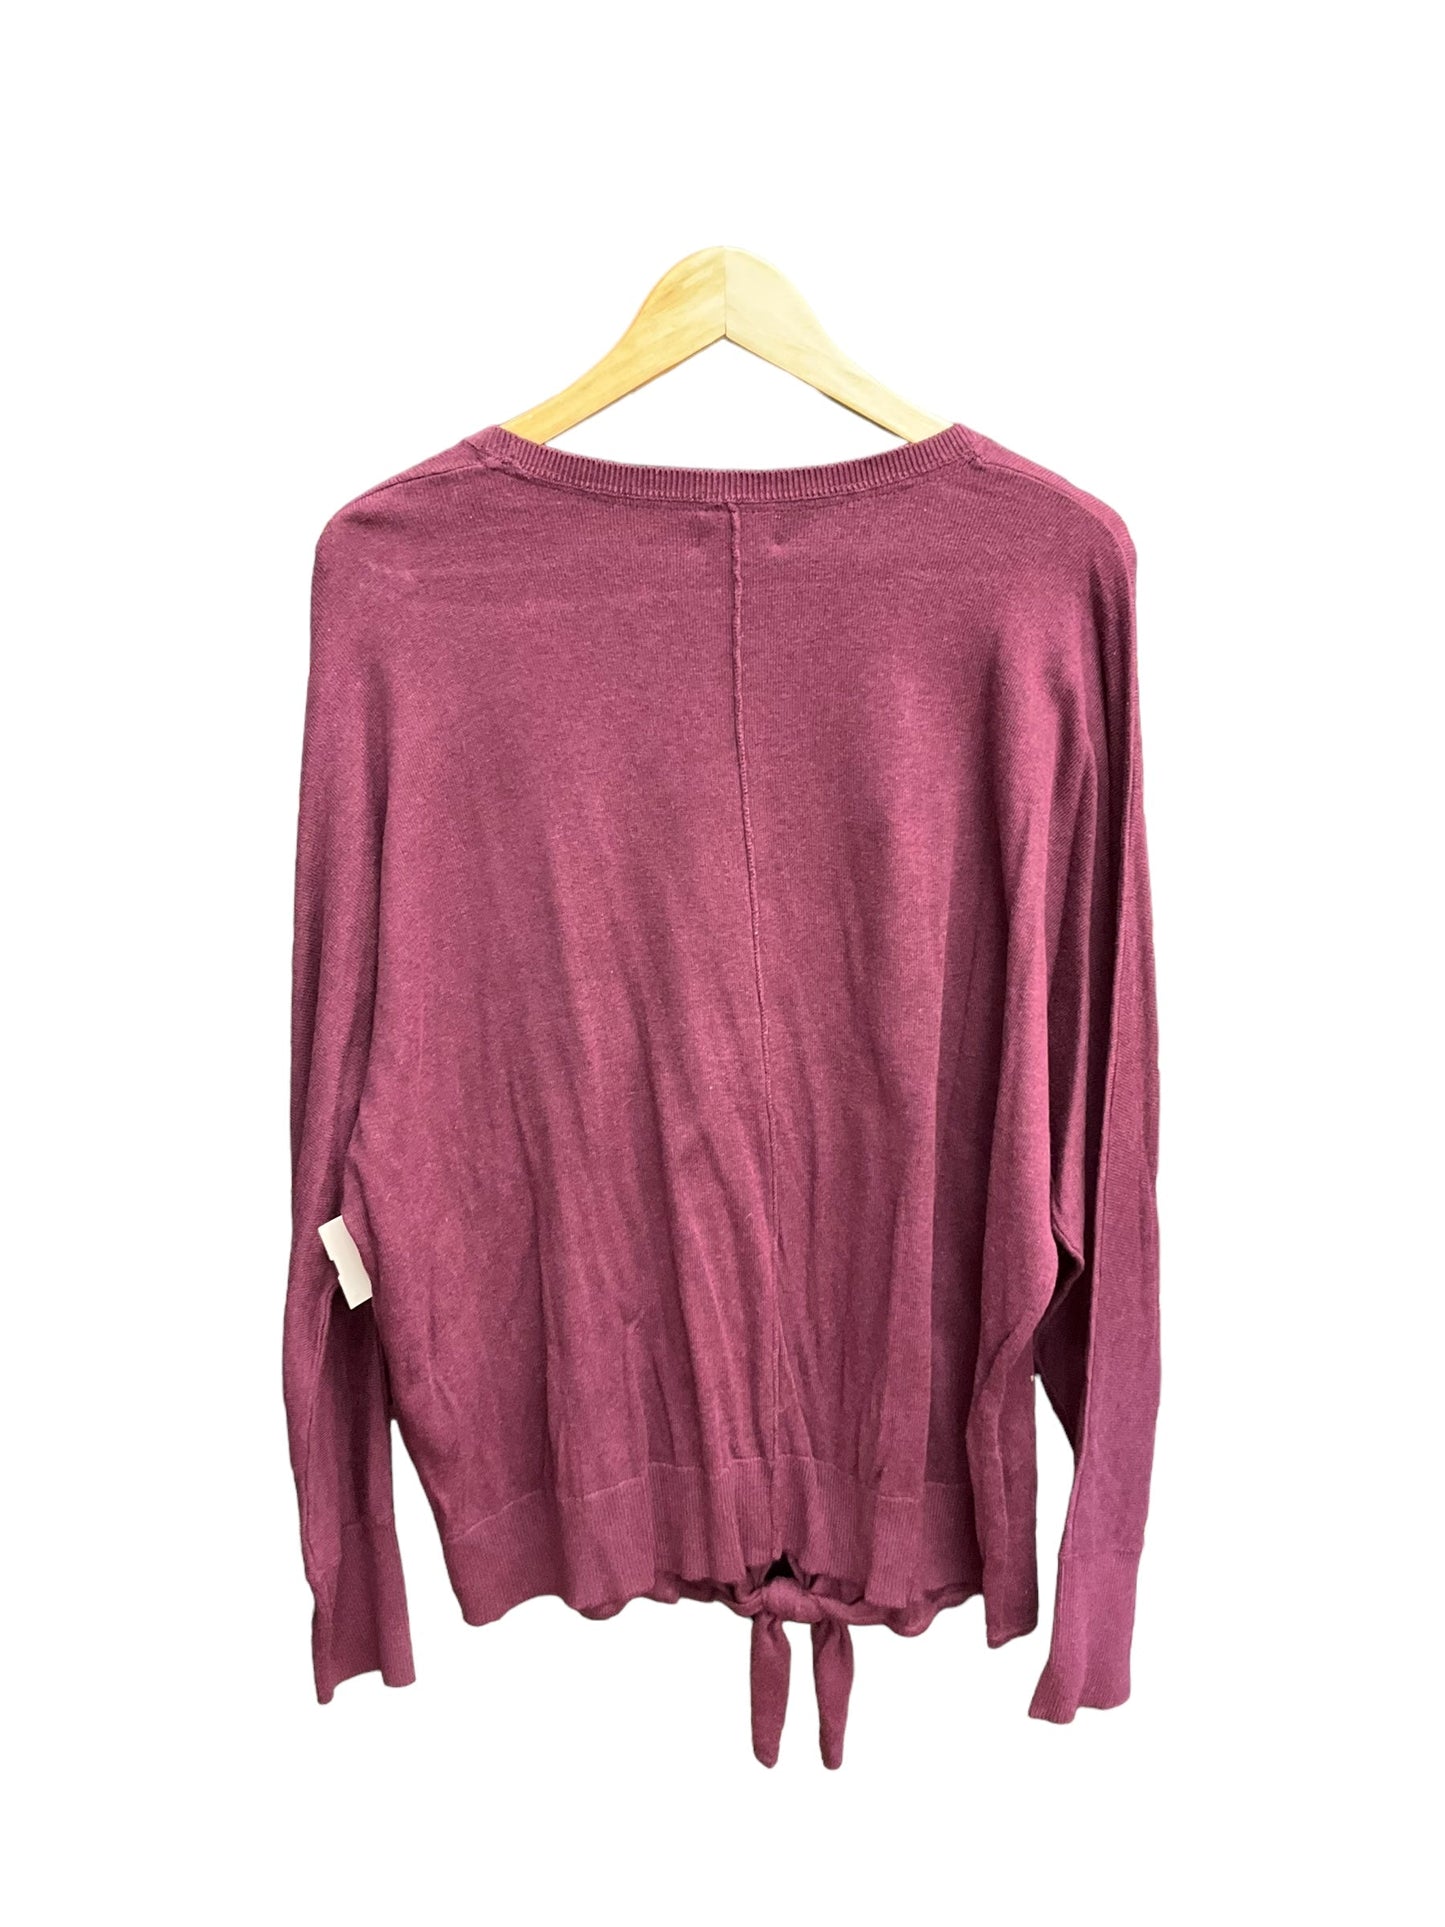 Mauve Top Long Sleeve Style And Company, Size Xl